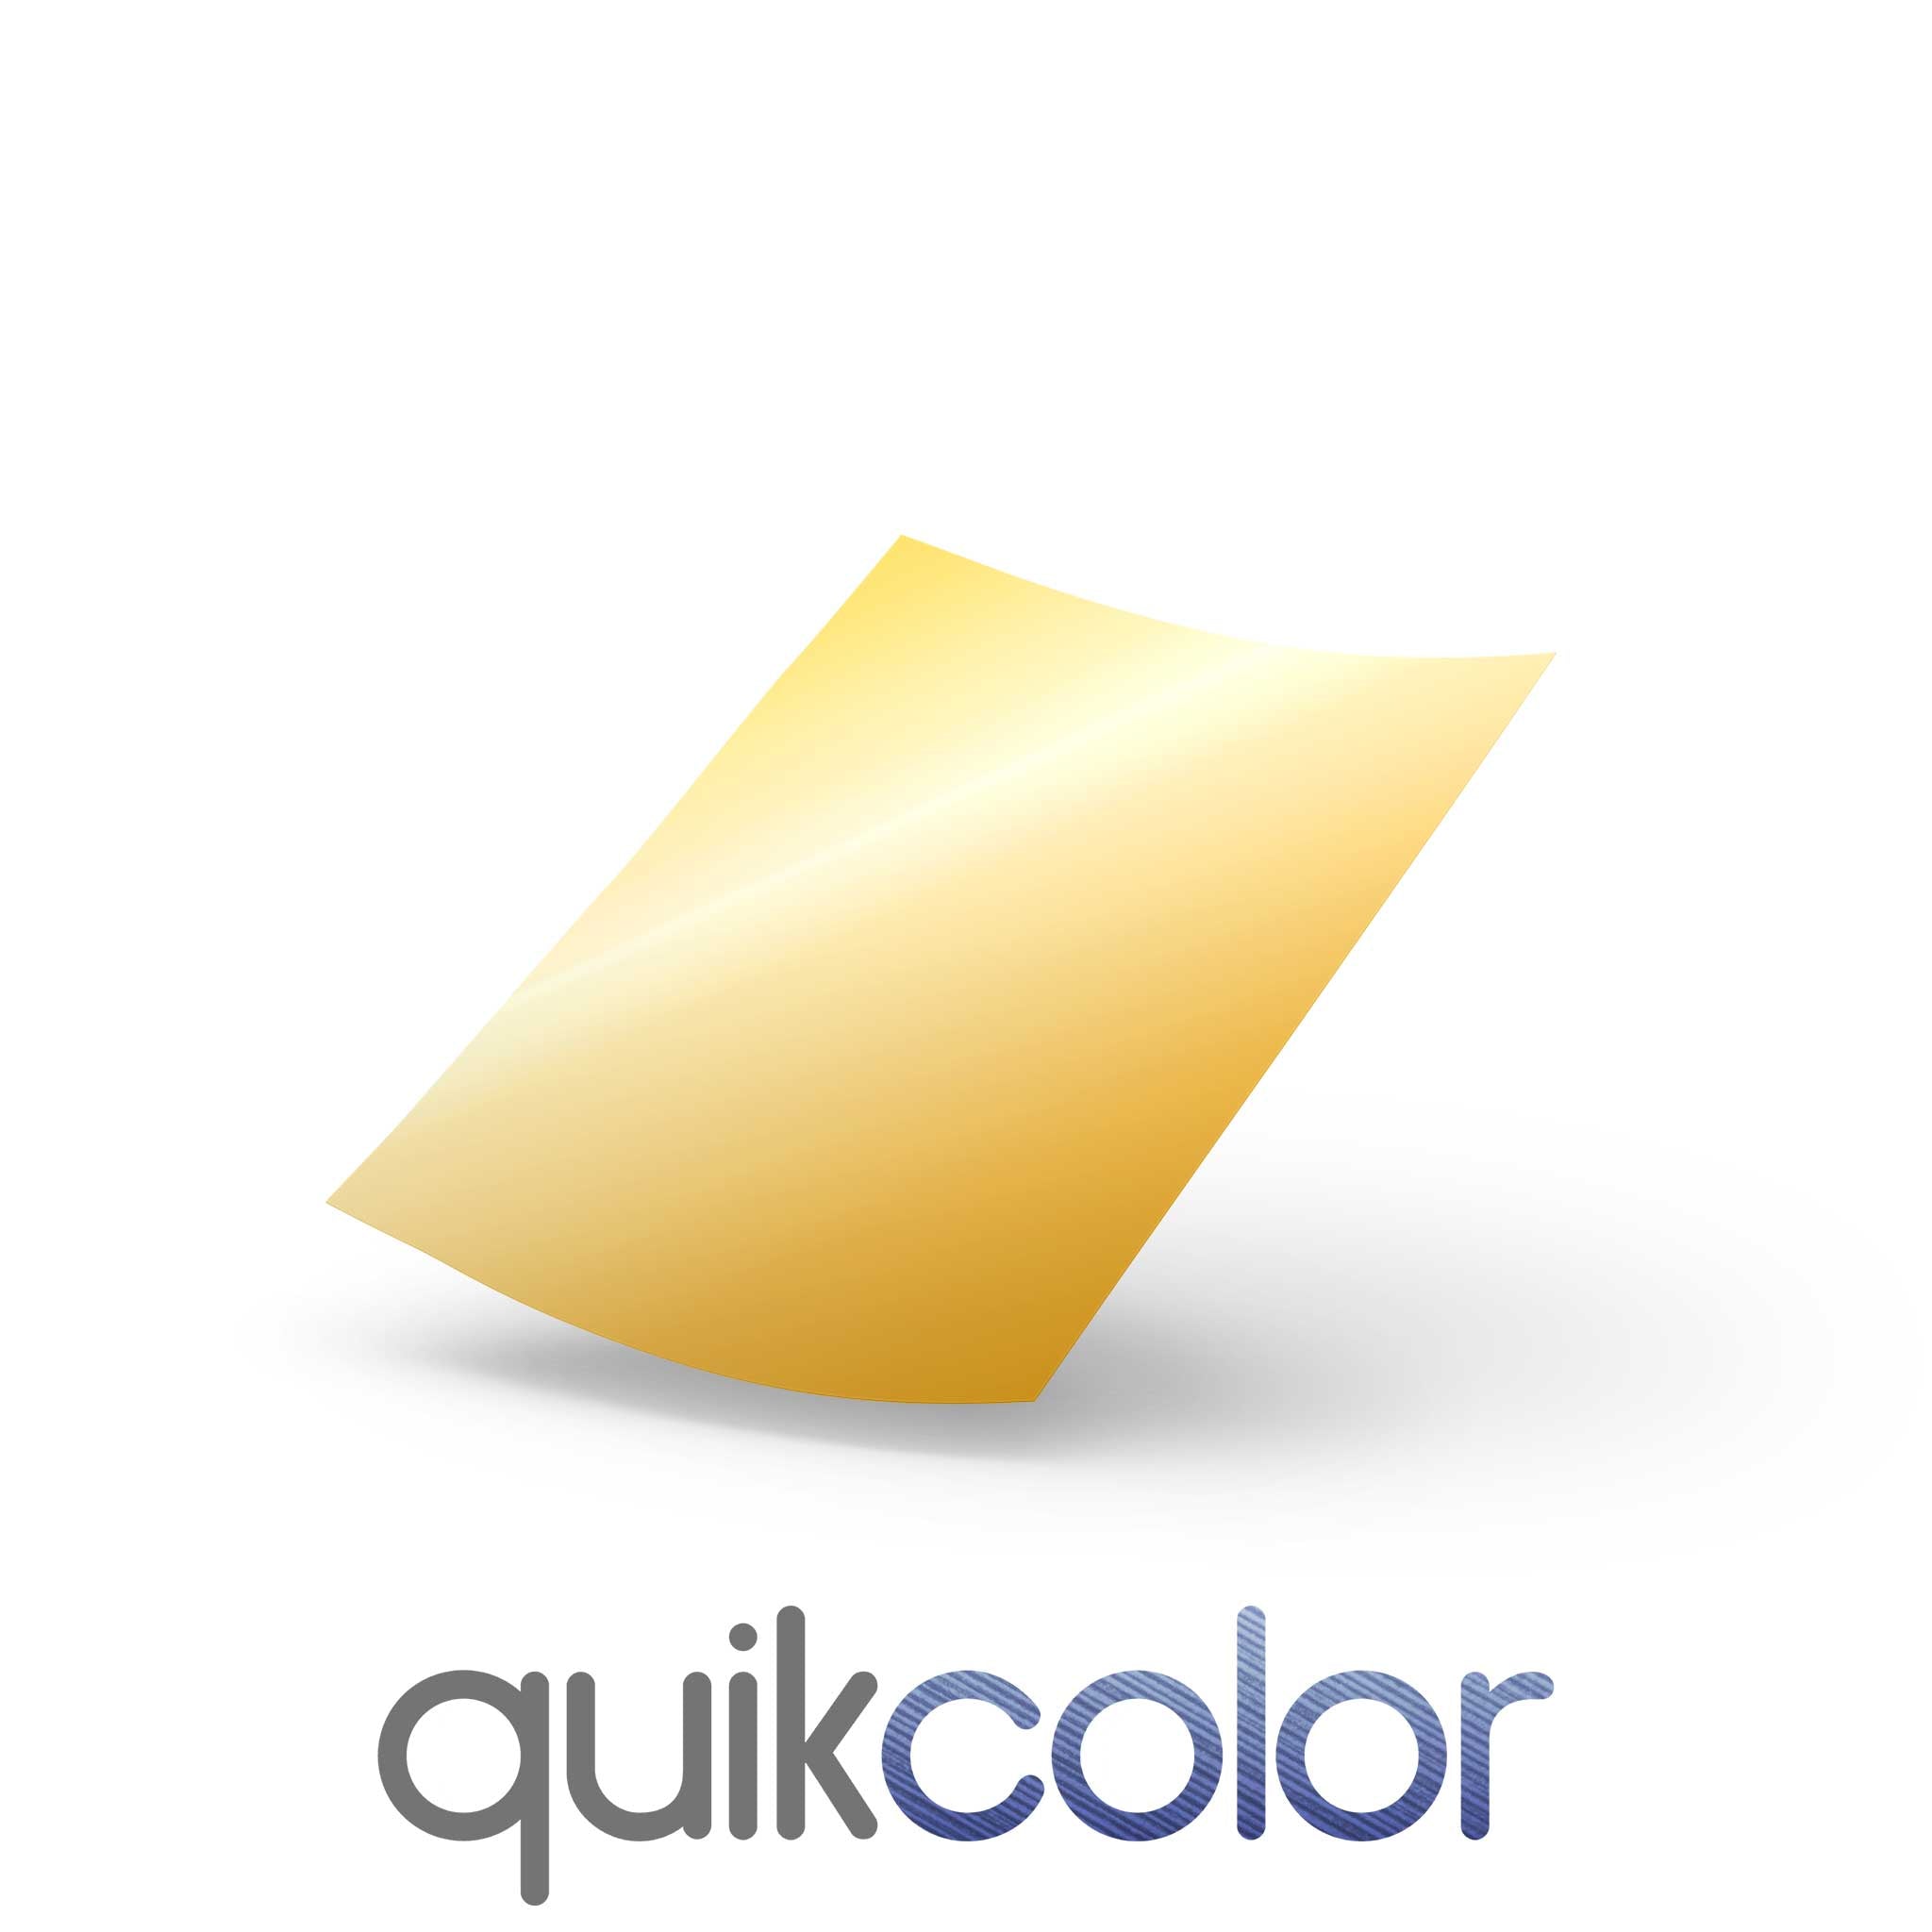 Quikcolor Metallic Hard Surface 1-Step Transfer Media for Ceramic, Glass and Metal